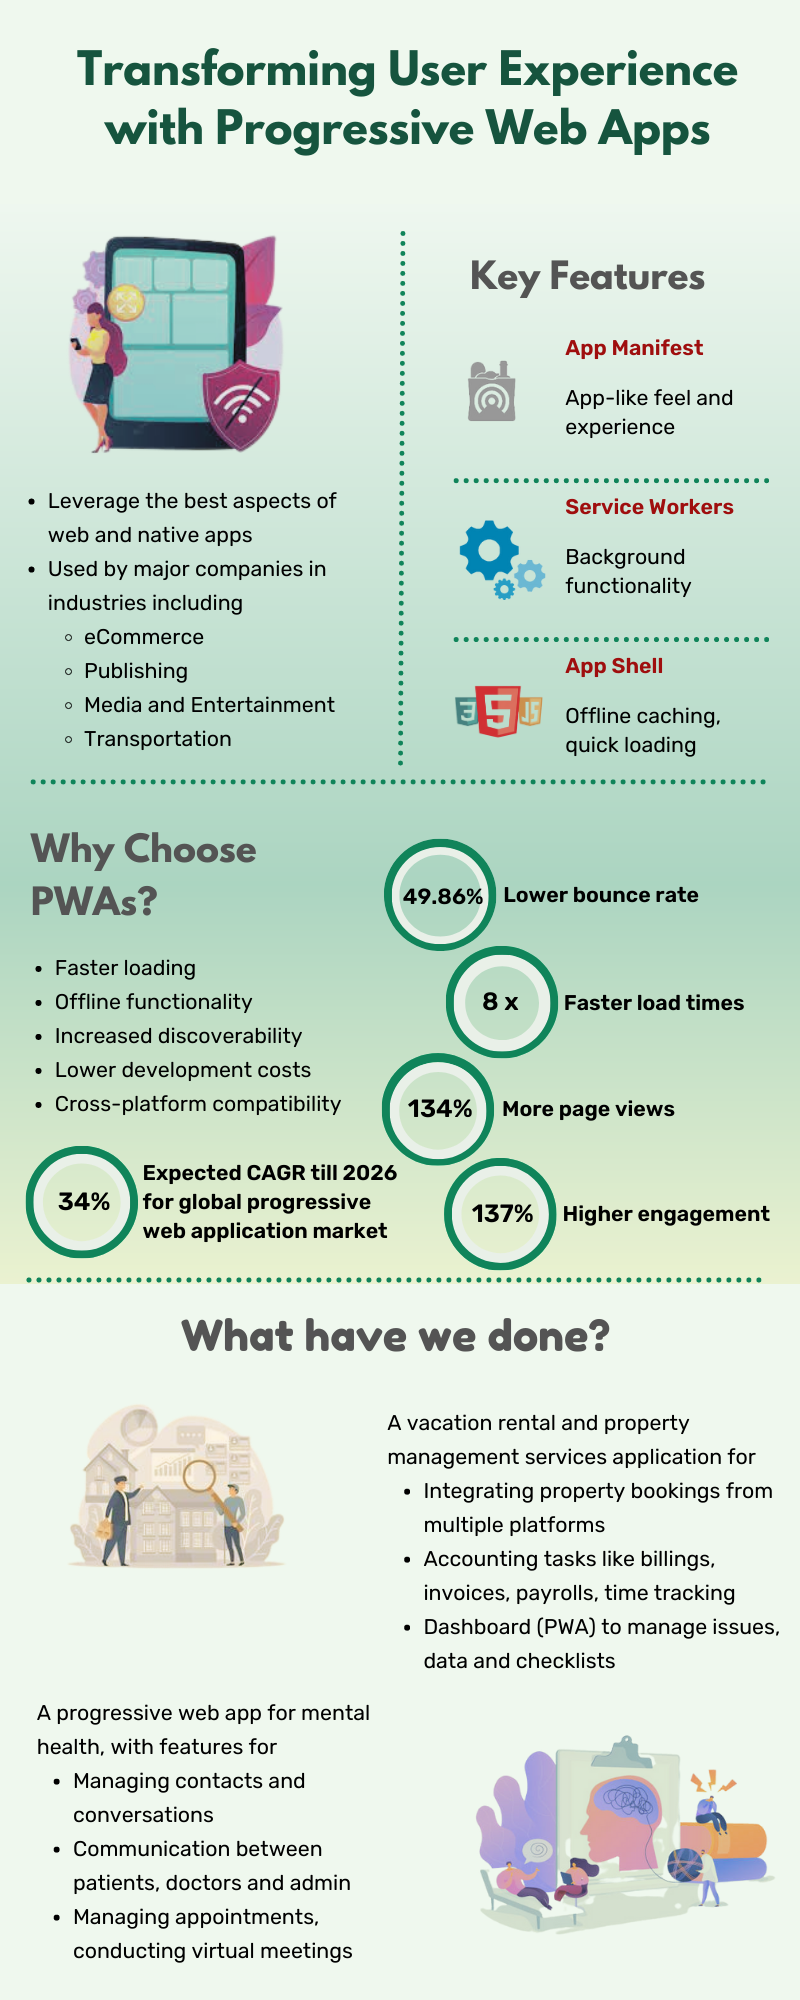 Transforming user experience with PWAs Infographic